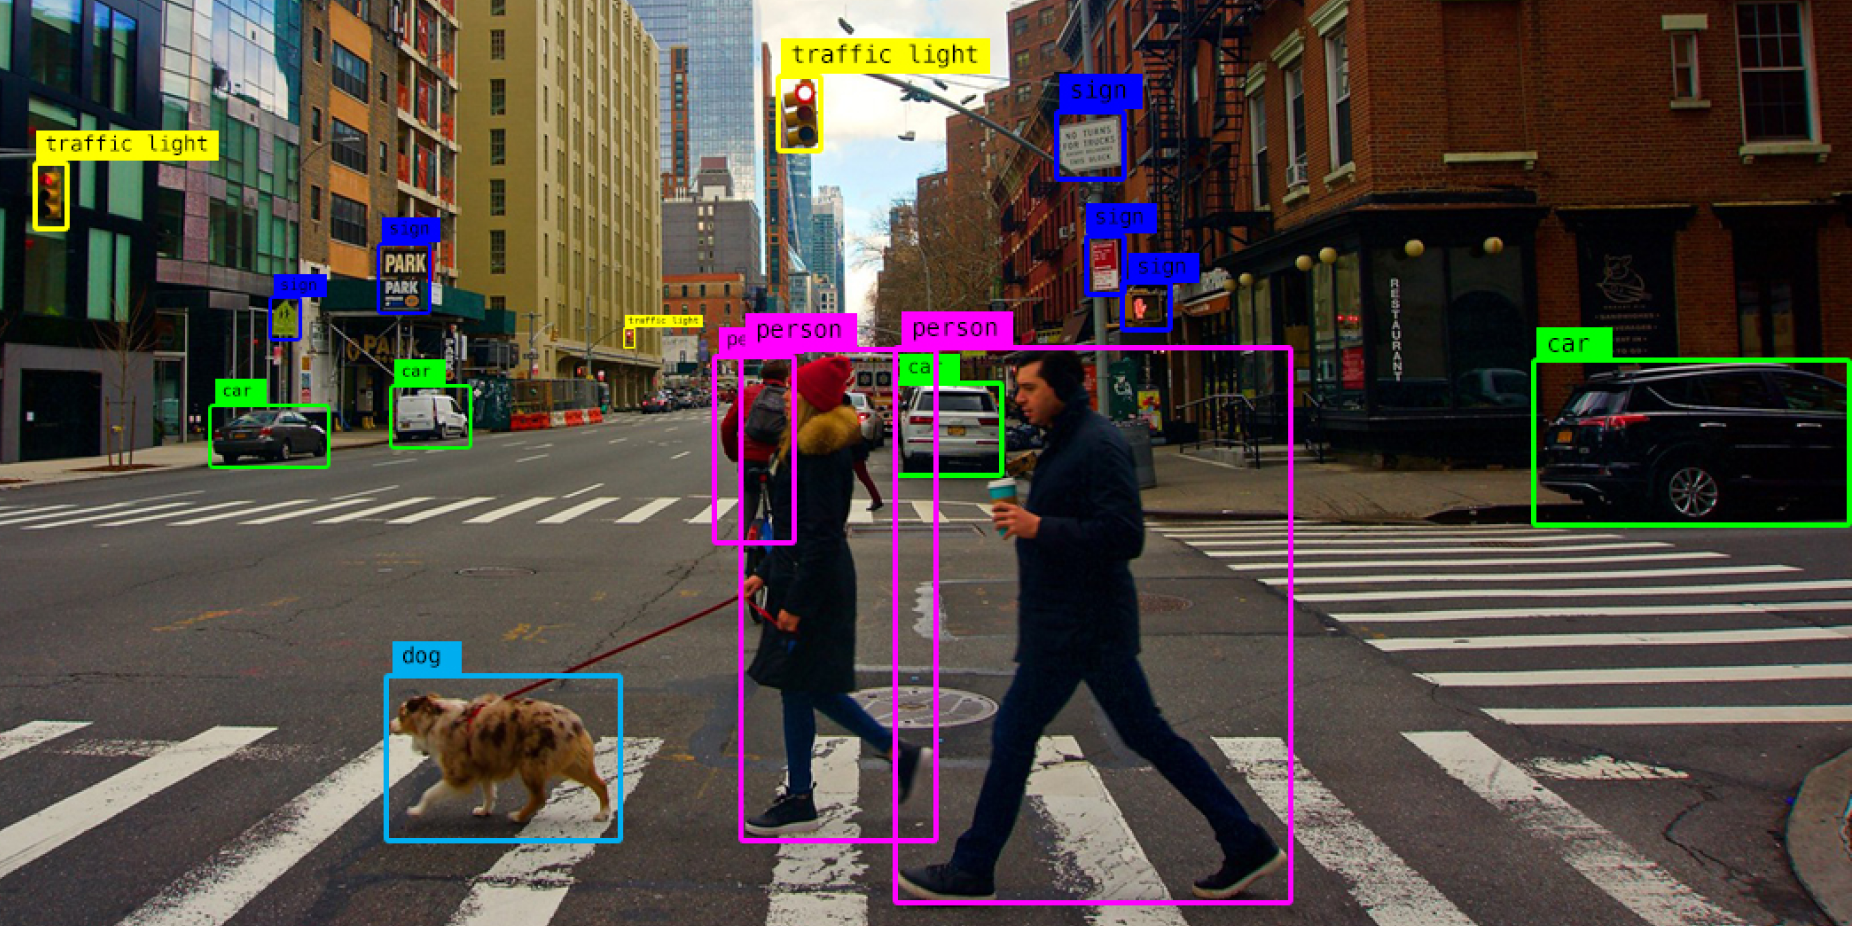 computer vision detects people, dogs, and traffic lights.